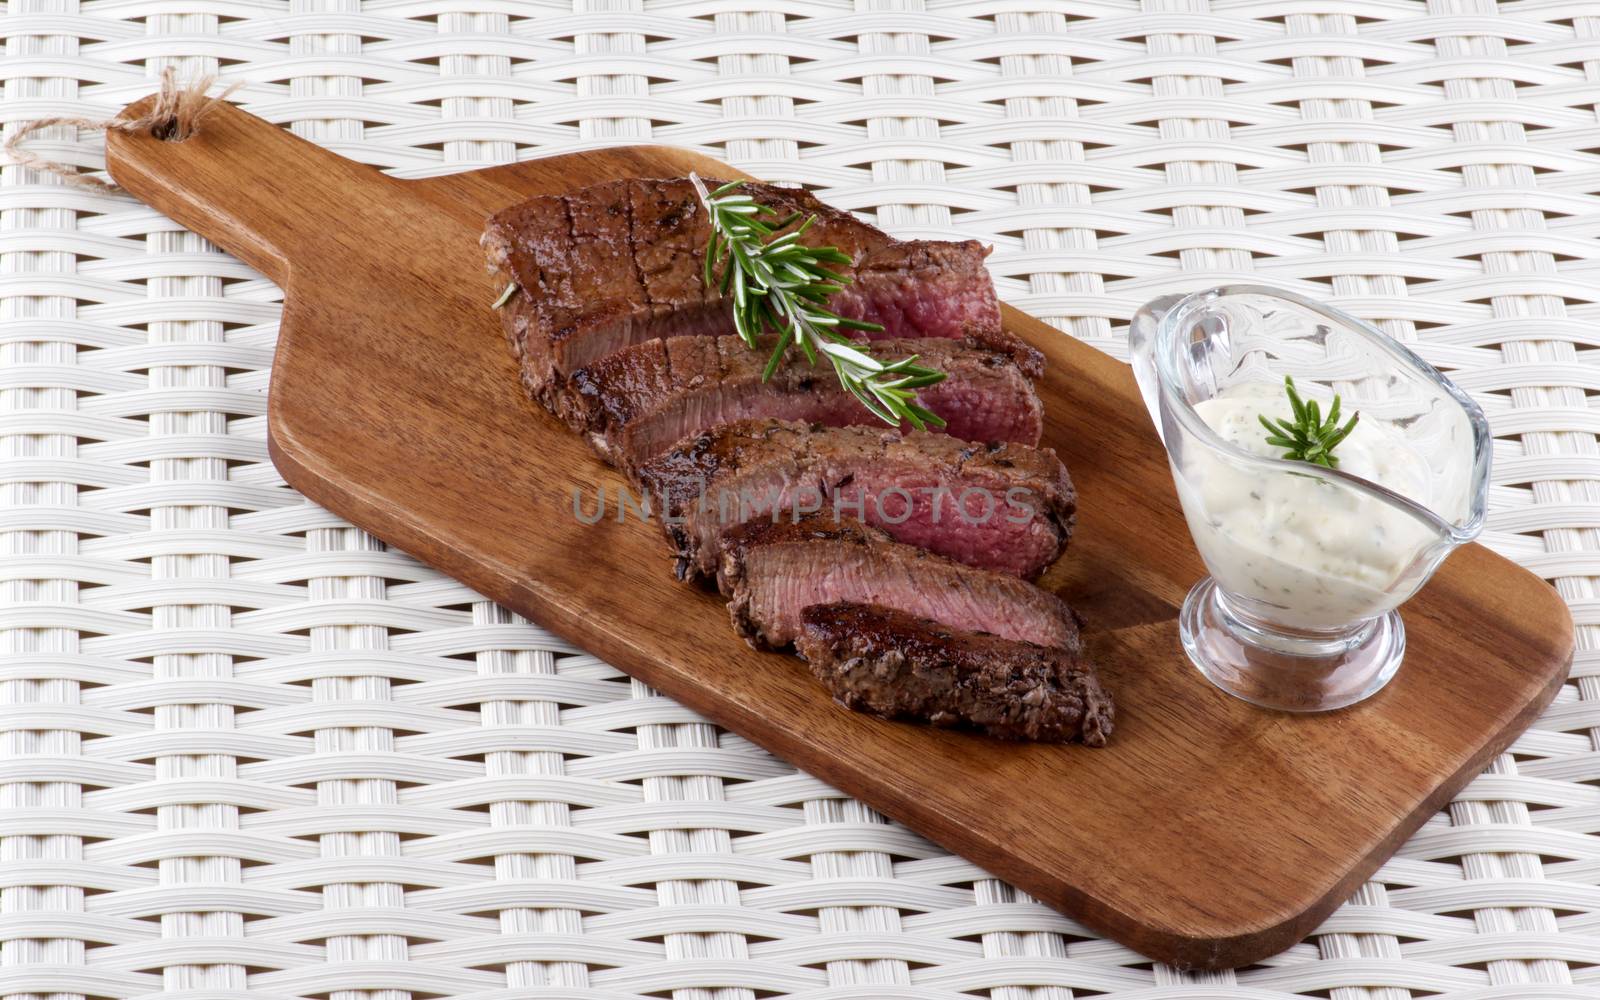 Delicious Roast Beef Medium Rare Sliced on Wooden Cutting Board with Blue Cheese Sauce and Rosemary on Wicker background